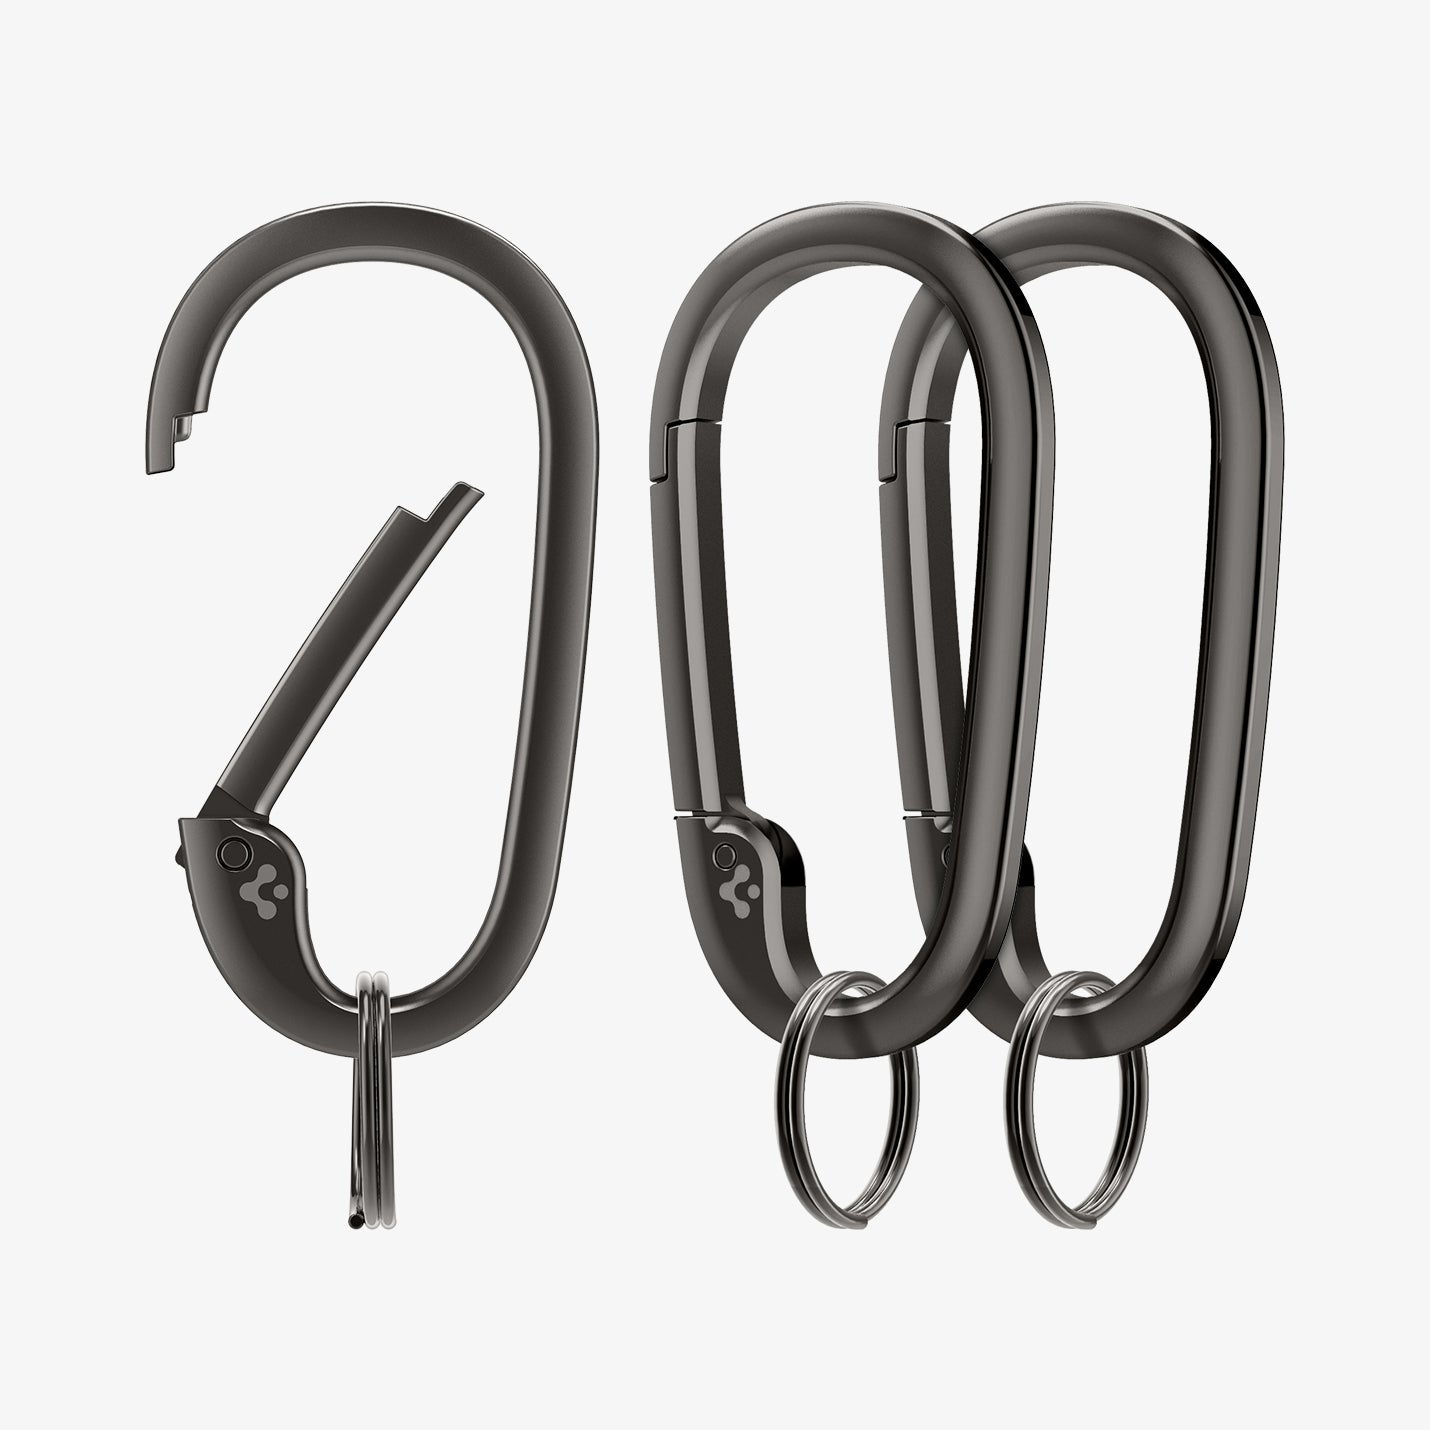 AHP02932 - Carabiner Basic Type in black showing the front of multiple carabiners